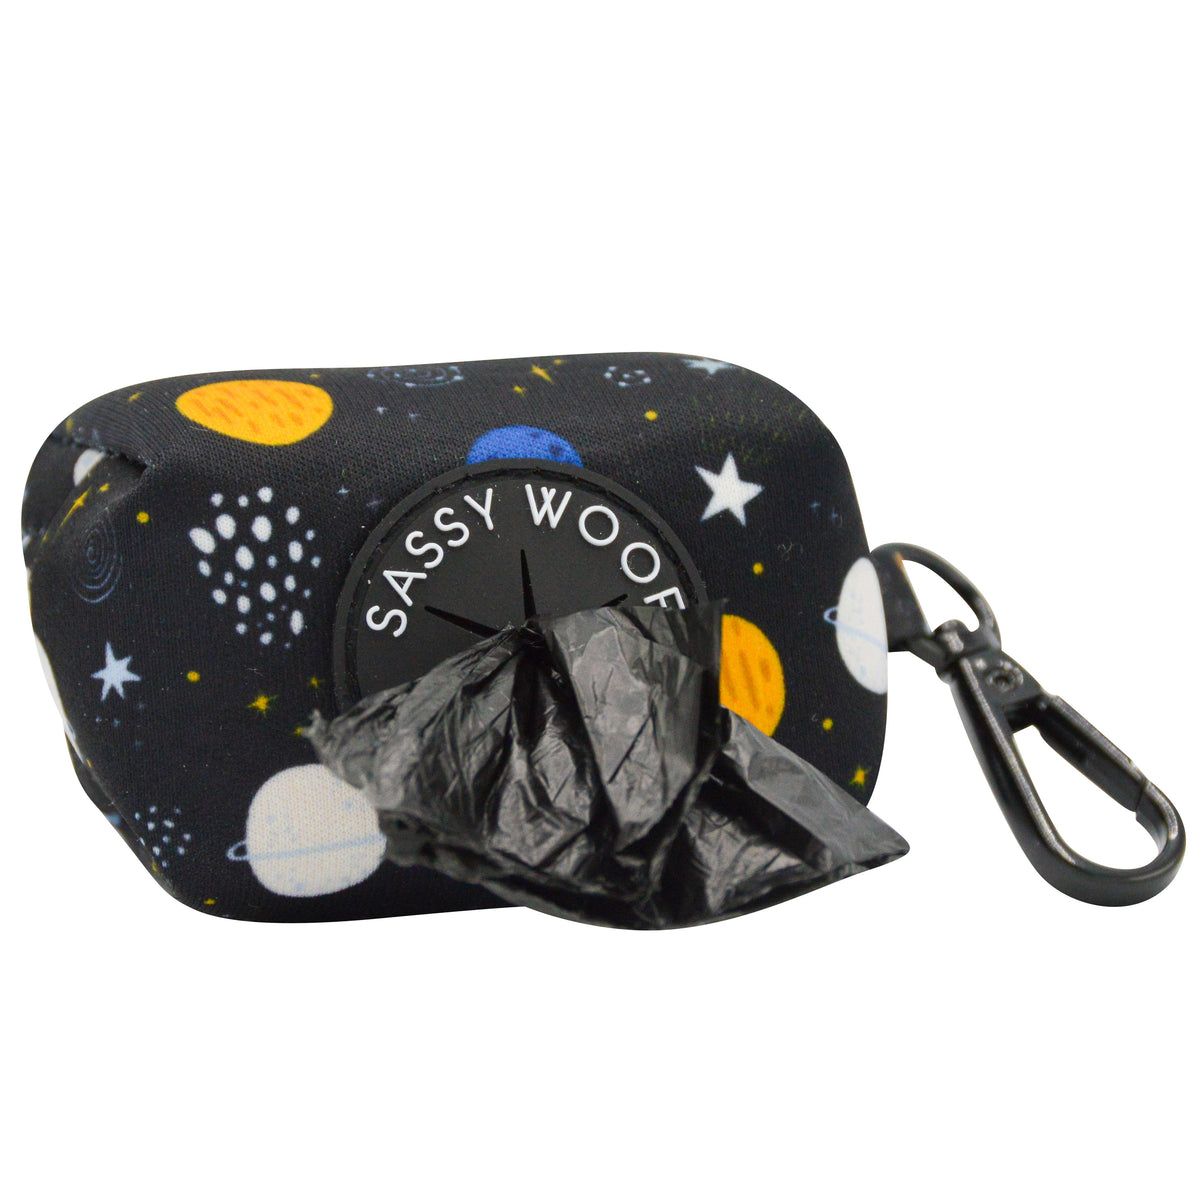 Dog Waste Bag Holder - To The Stars and Beyond